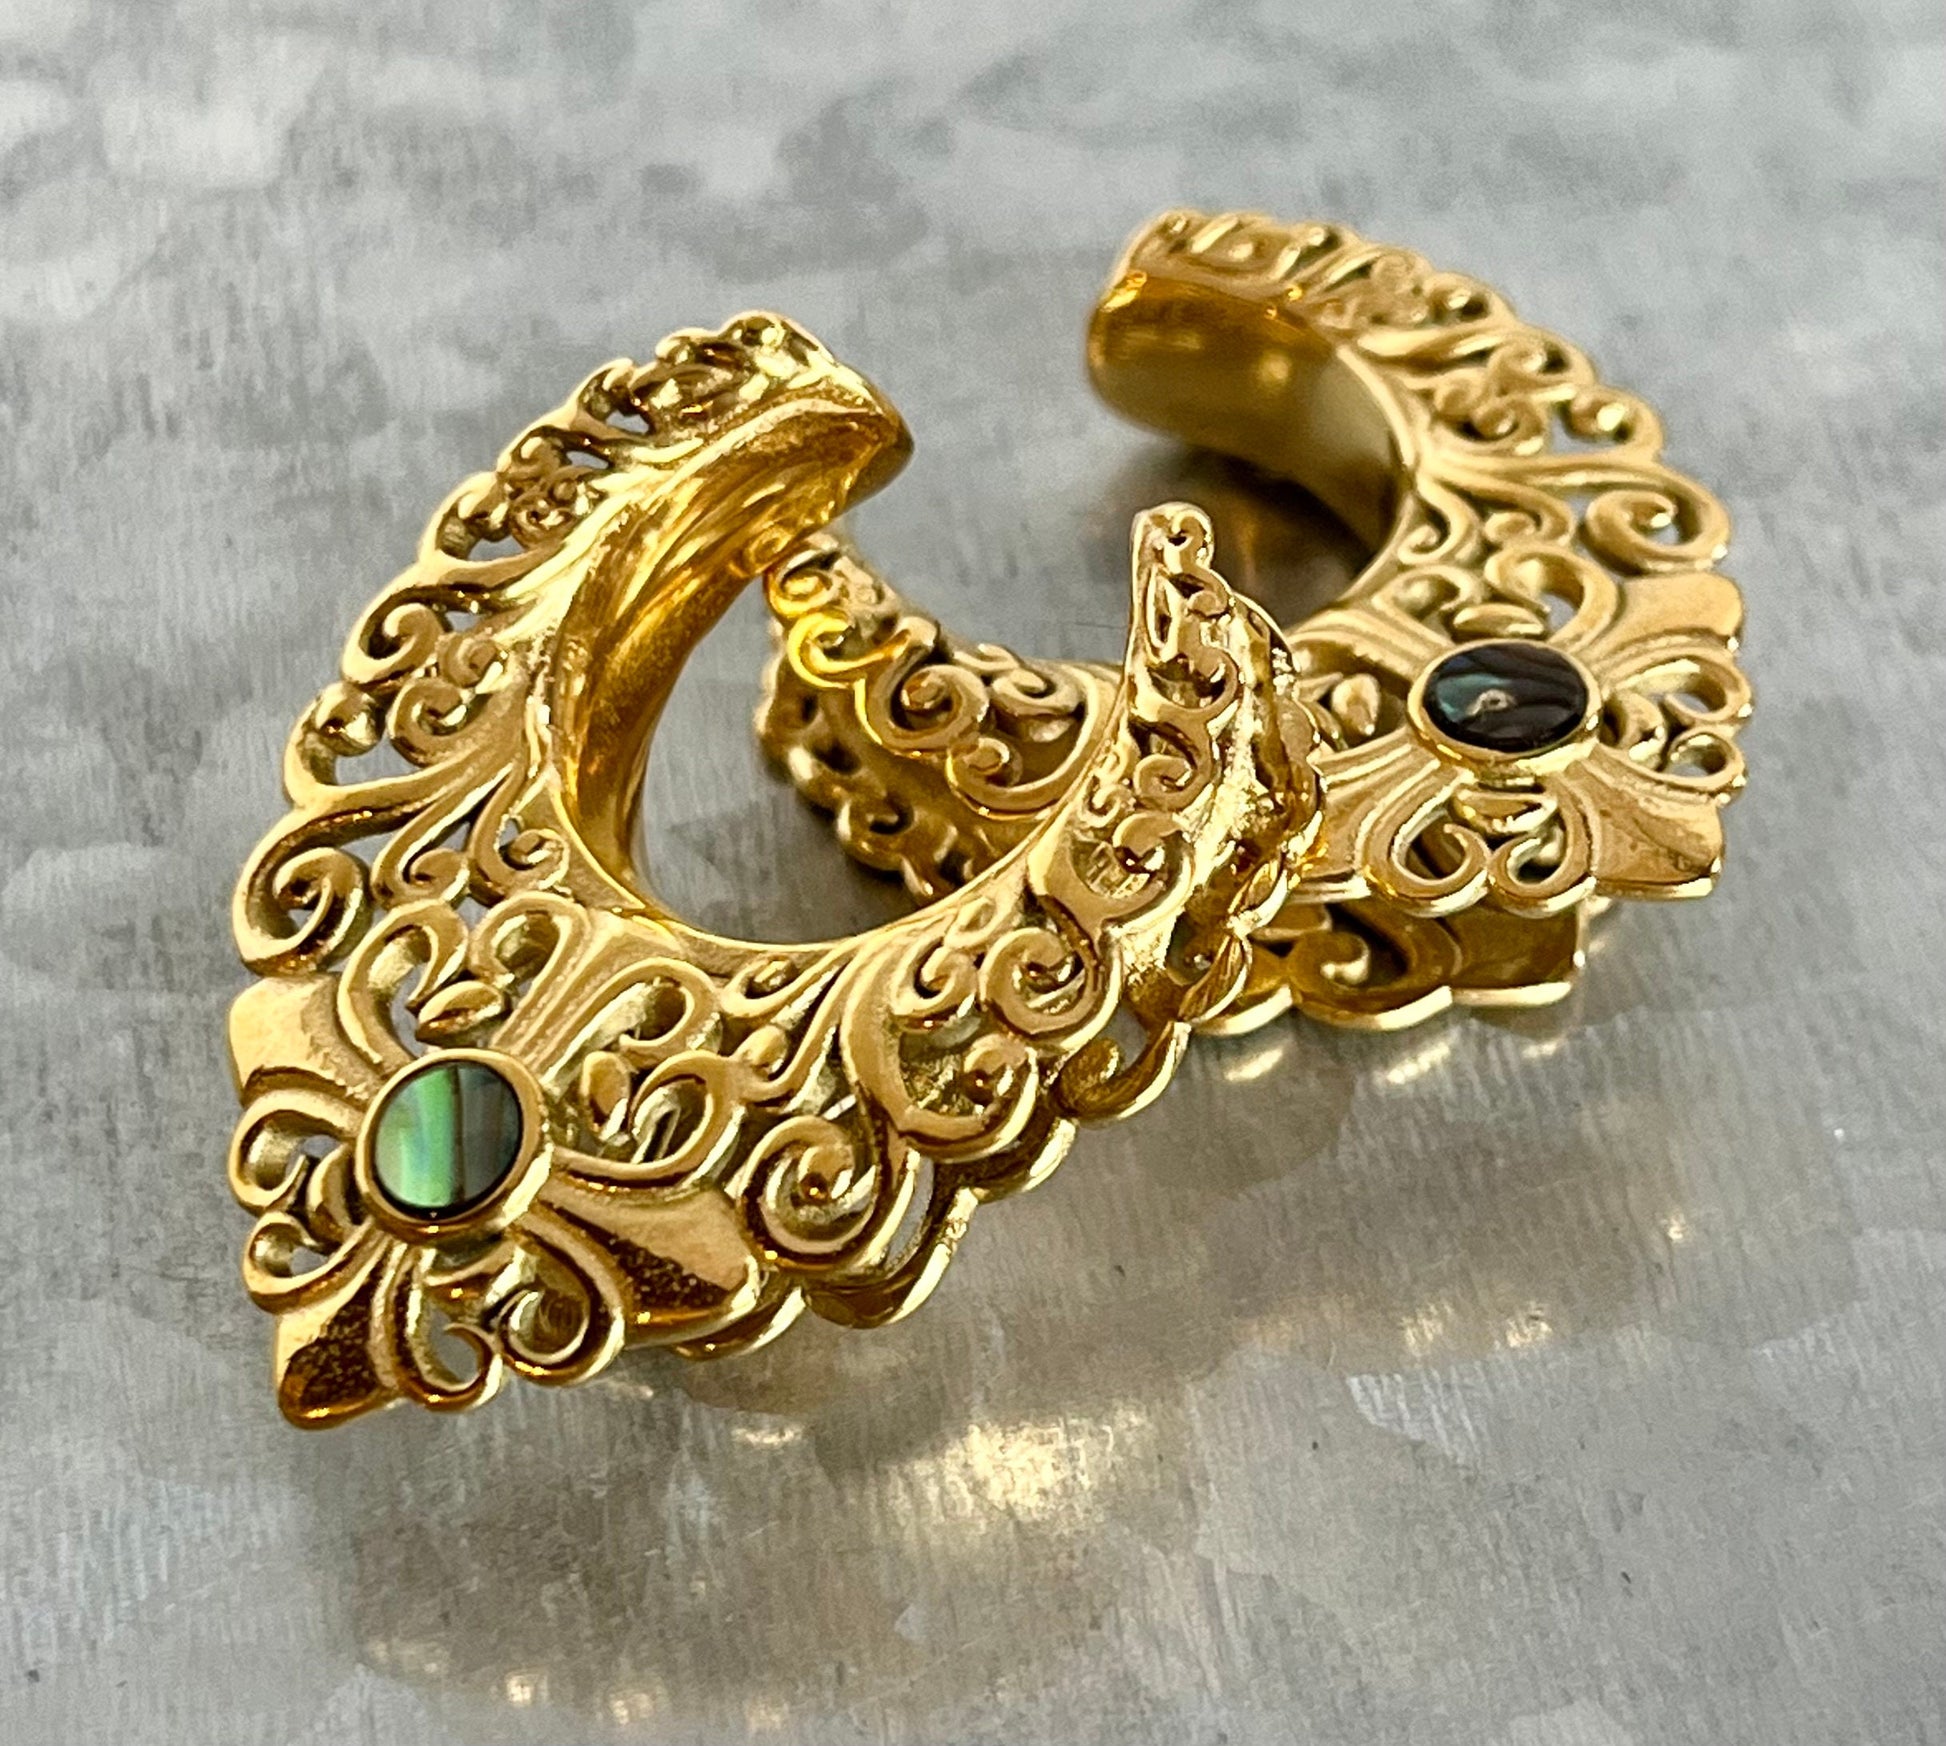 PAIR of Stunning Gold Plated Filigree Abalone Saddle Ear Spreader Hanger-Tunnels/Plugs - Gauges 0g (8mm) thru 3/4" (19mm) available!